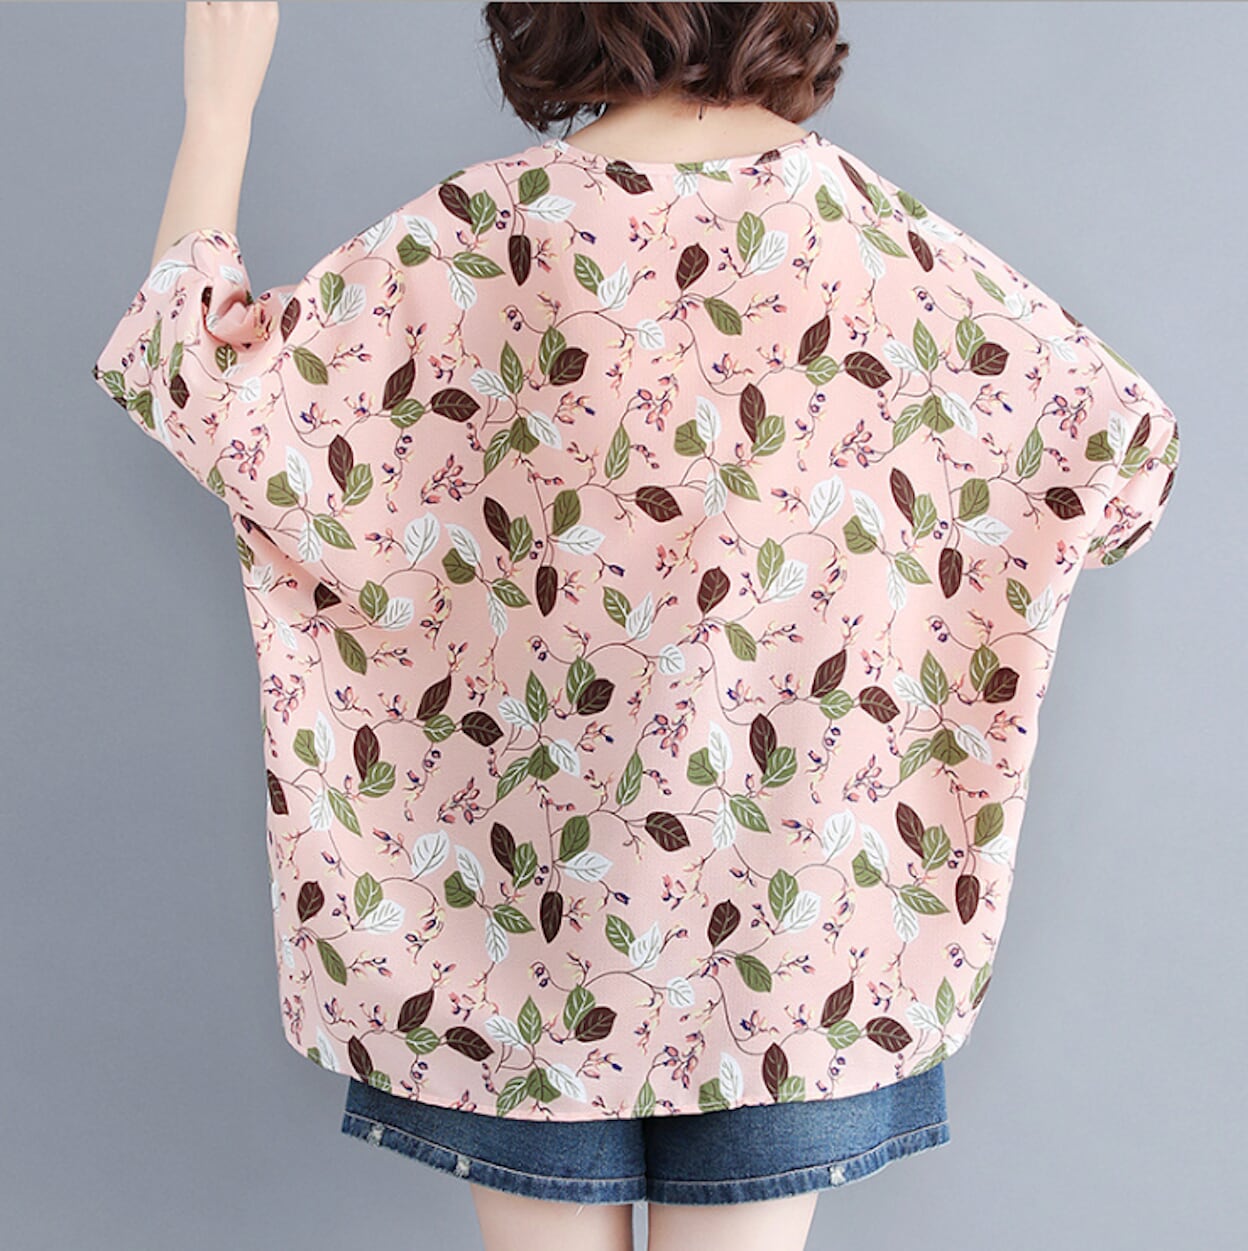 Womens Batwing Top with Leaves Pattern